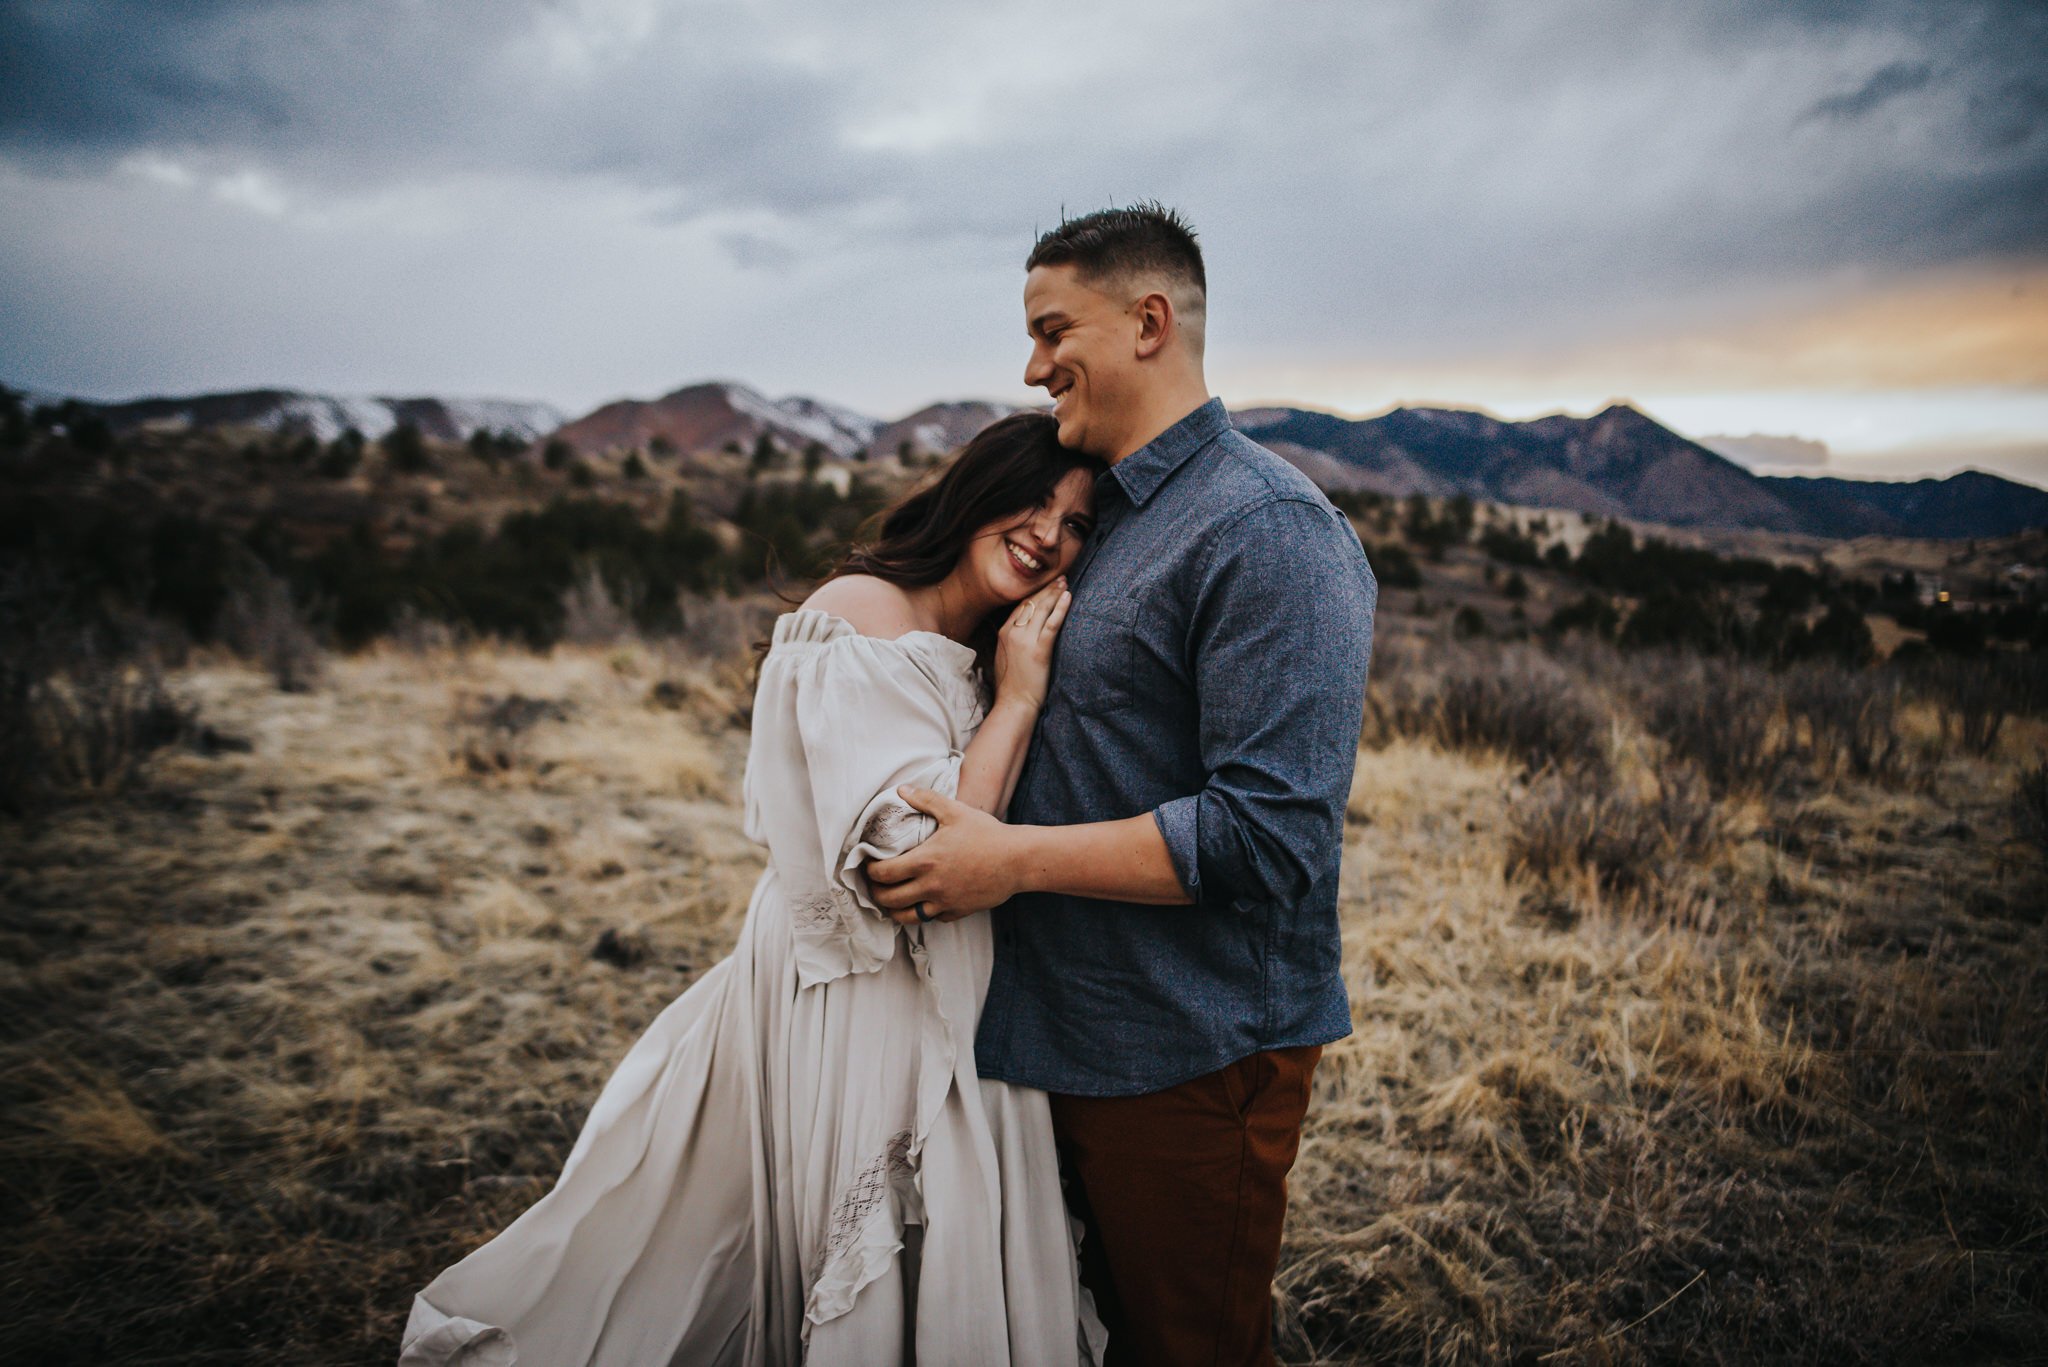 Miller+Family+Session+Mentorship+Colorado+Springs+Colorado+Sunset+Ute+Valley+Park+Mountains+Fields+Mom+Dad+Son+Daughter+Baby+Wild+Prairie+Photography-37-2020.jpeg